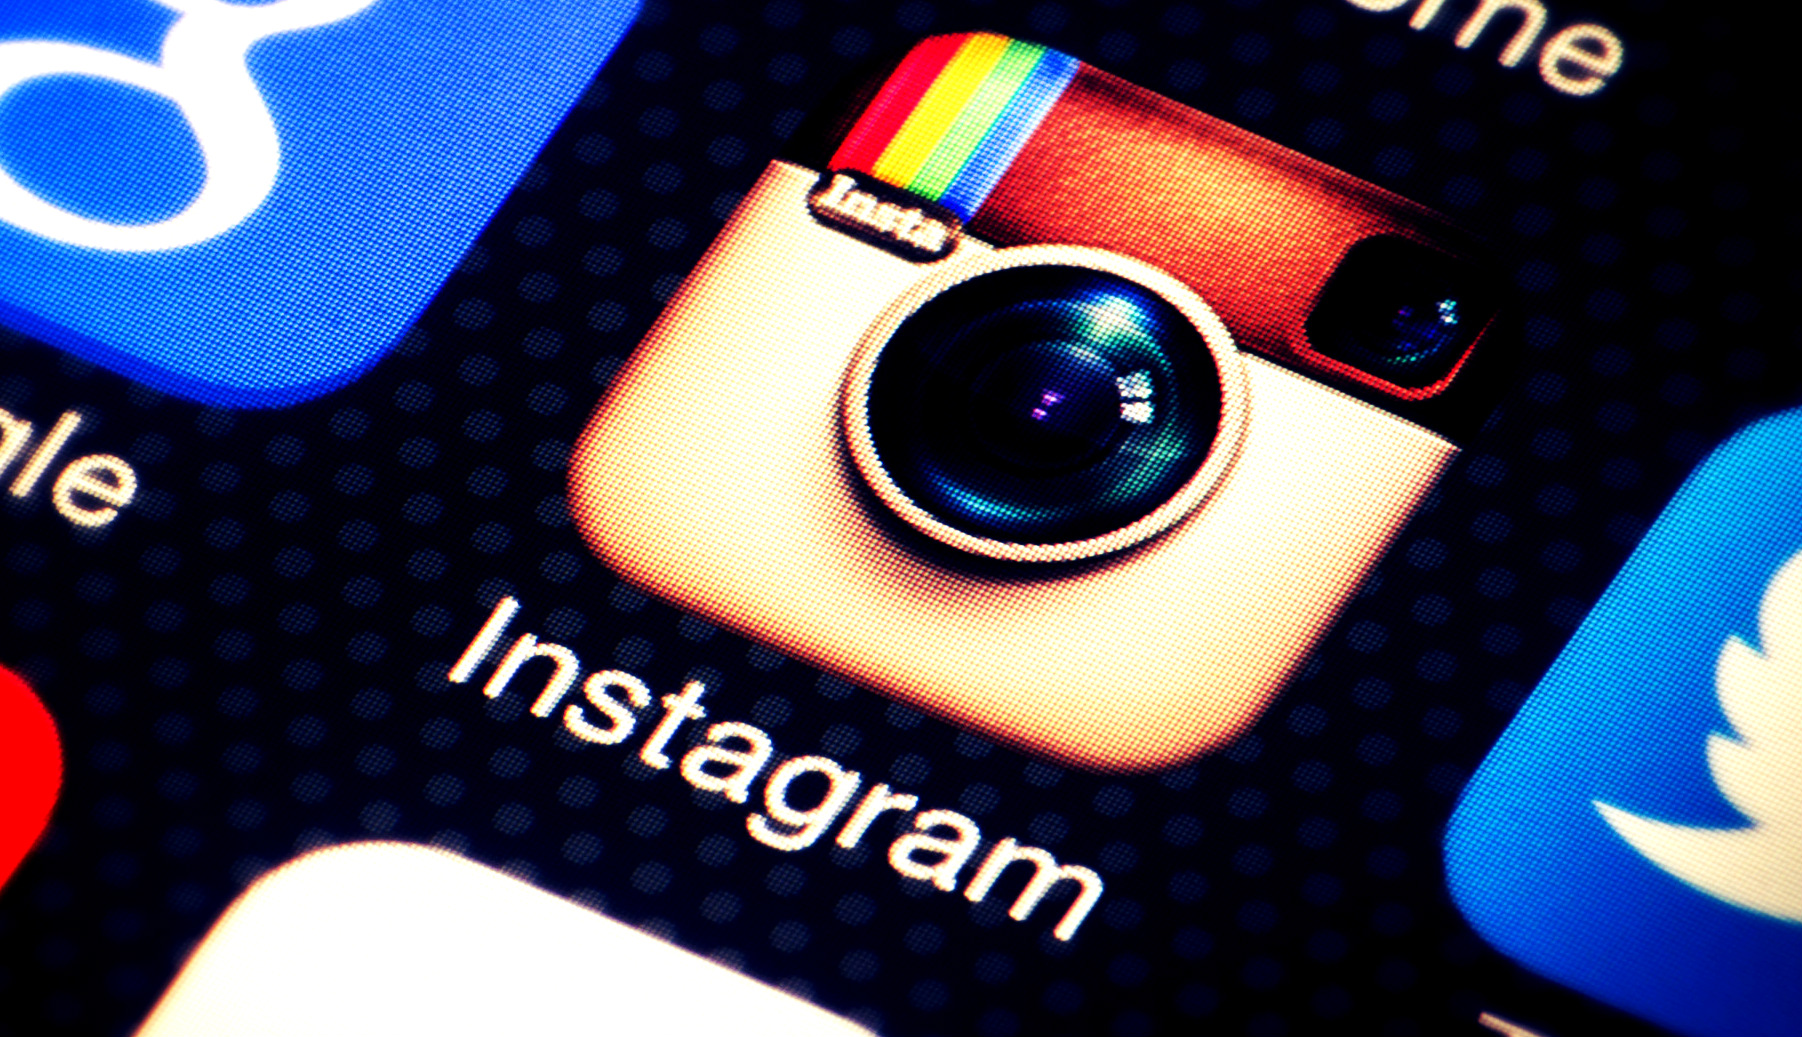 6 things you need to know about Instagram for your small business